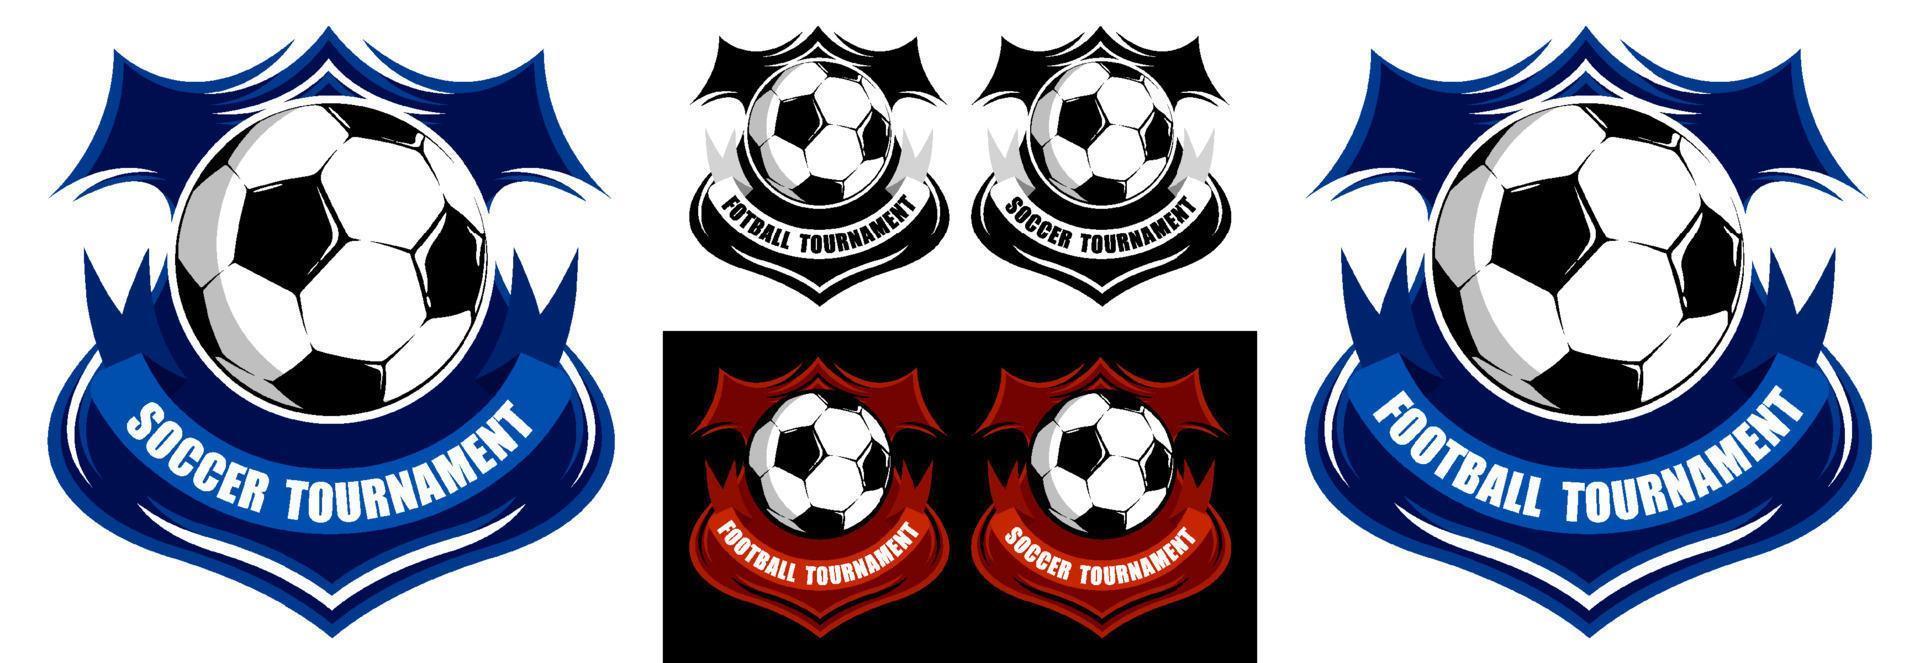 Classic football sporting emblems. Soccer ball on background of stylized shield. Tournament symbol. Easy to edit color. Vector